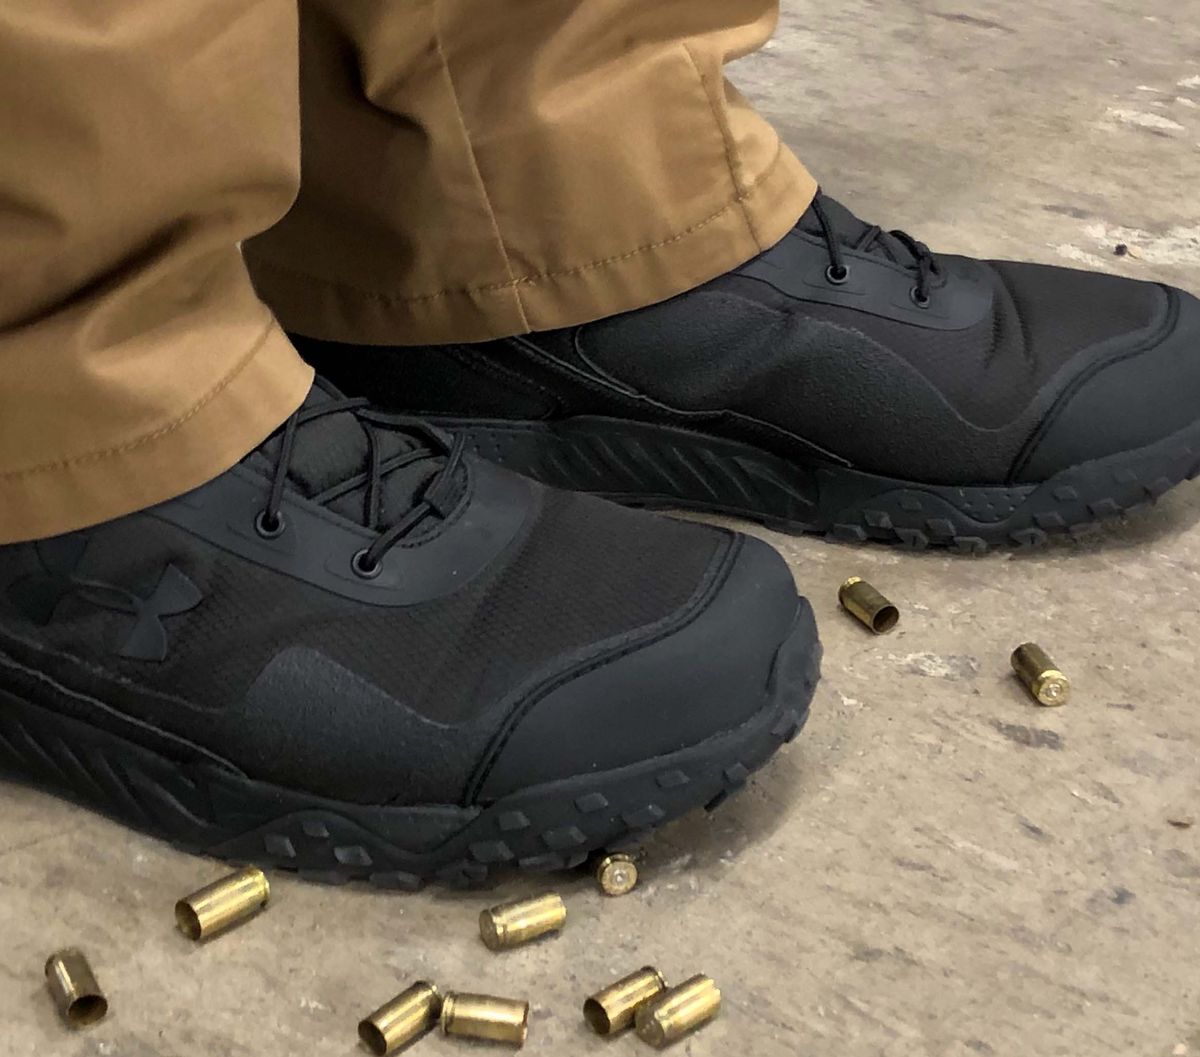 under armour patrol boots